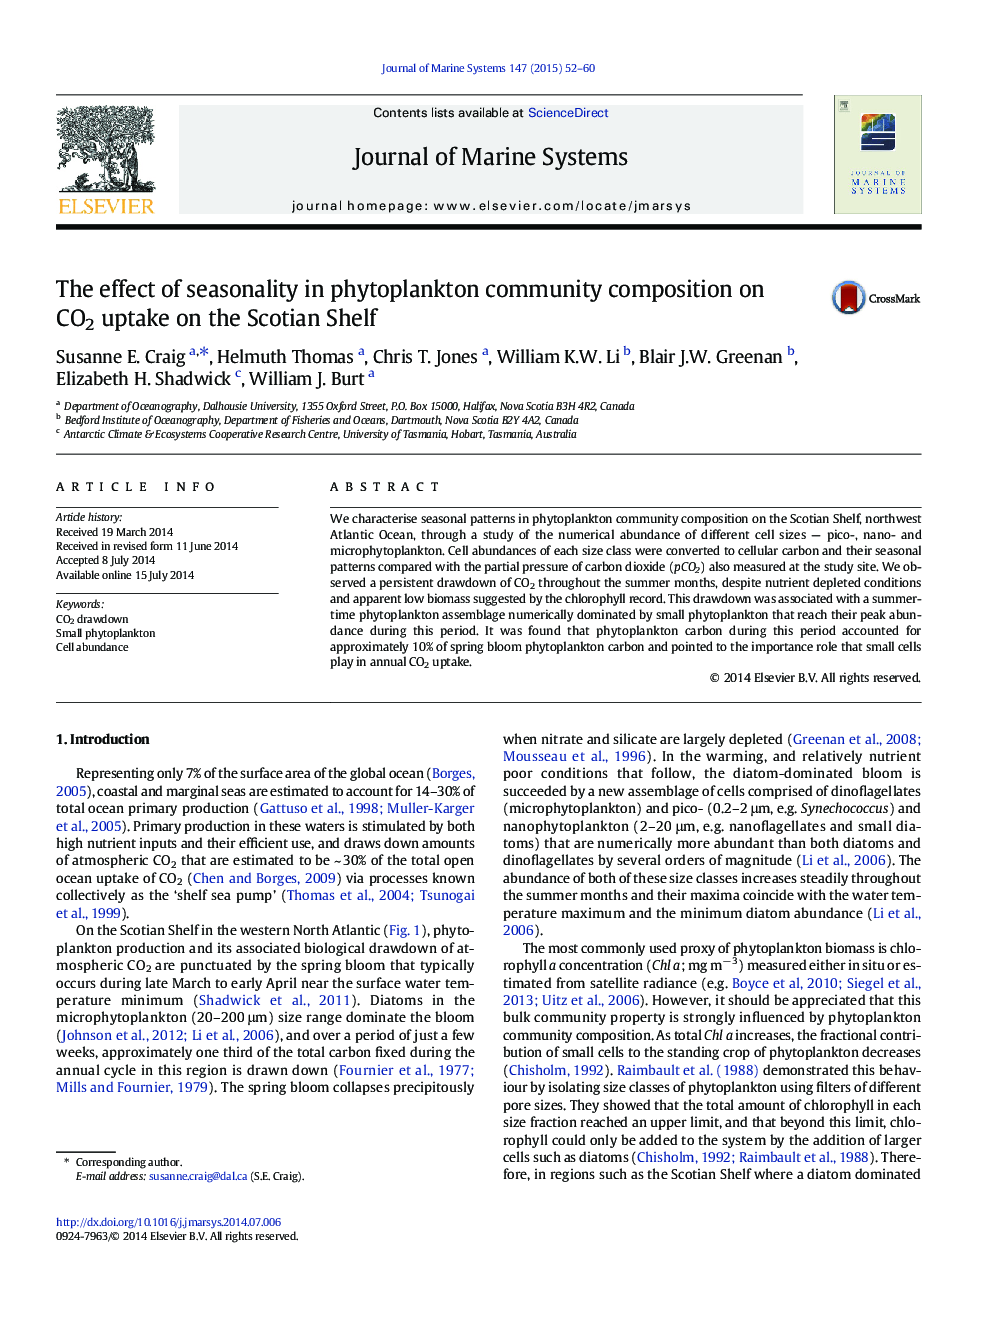 The effect of seasonality in phytoplankton community composition on CO2 uptake on the Scotian Shelf